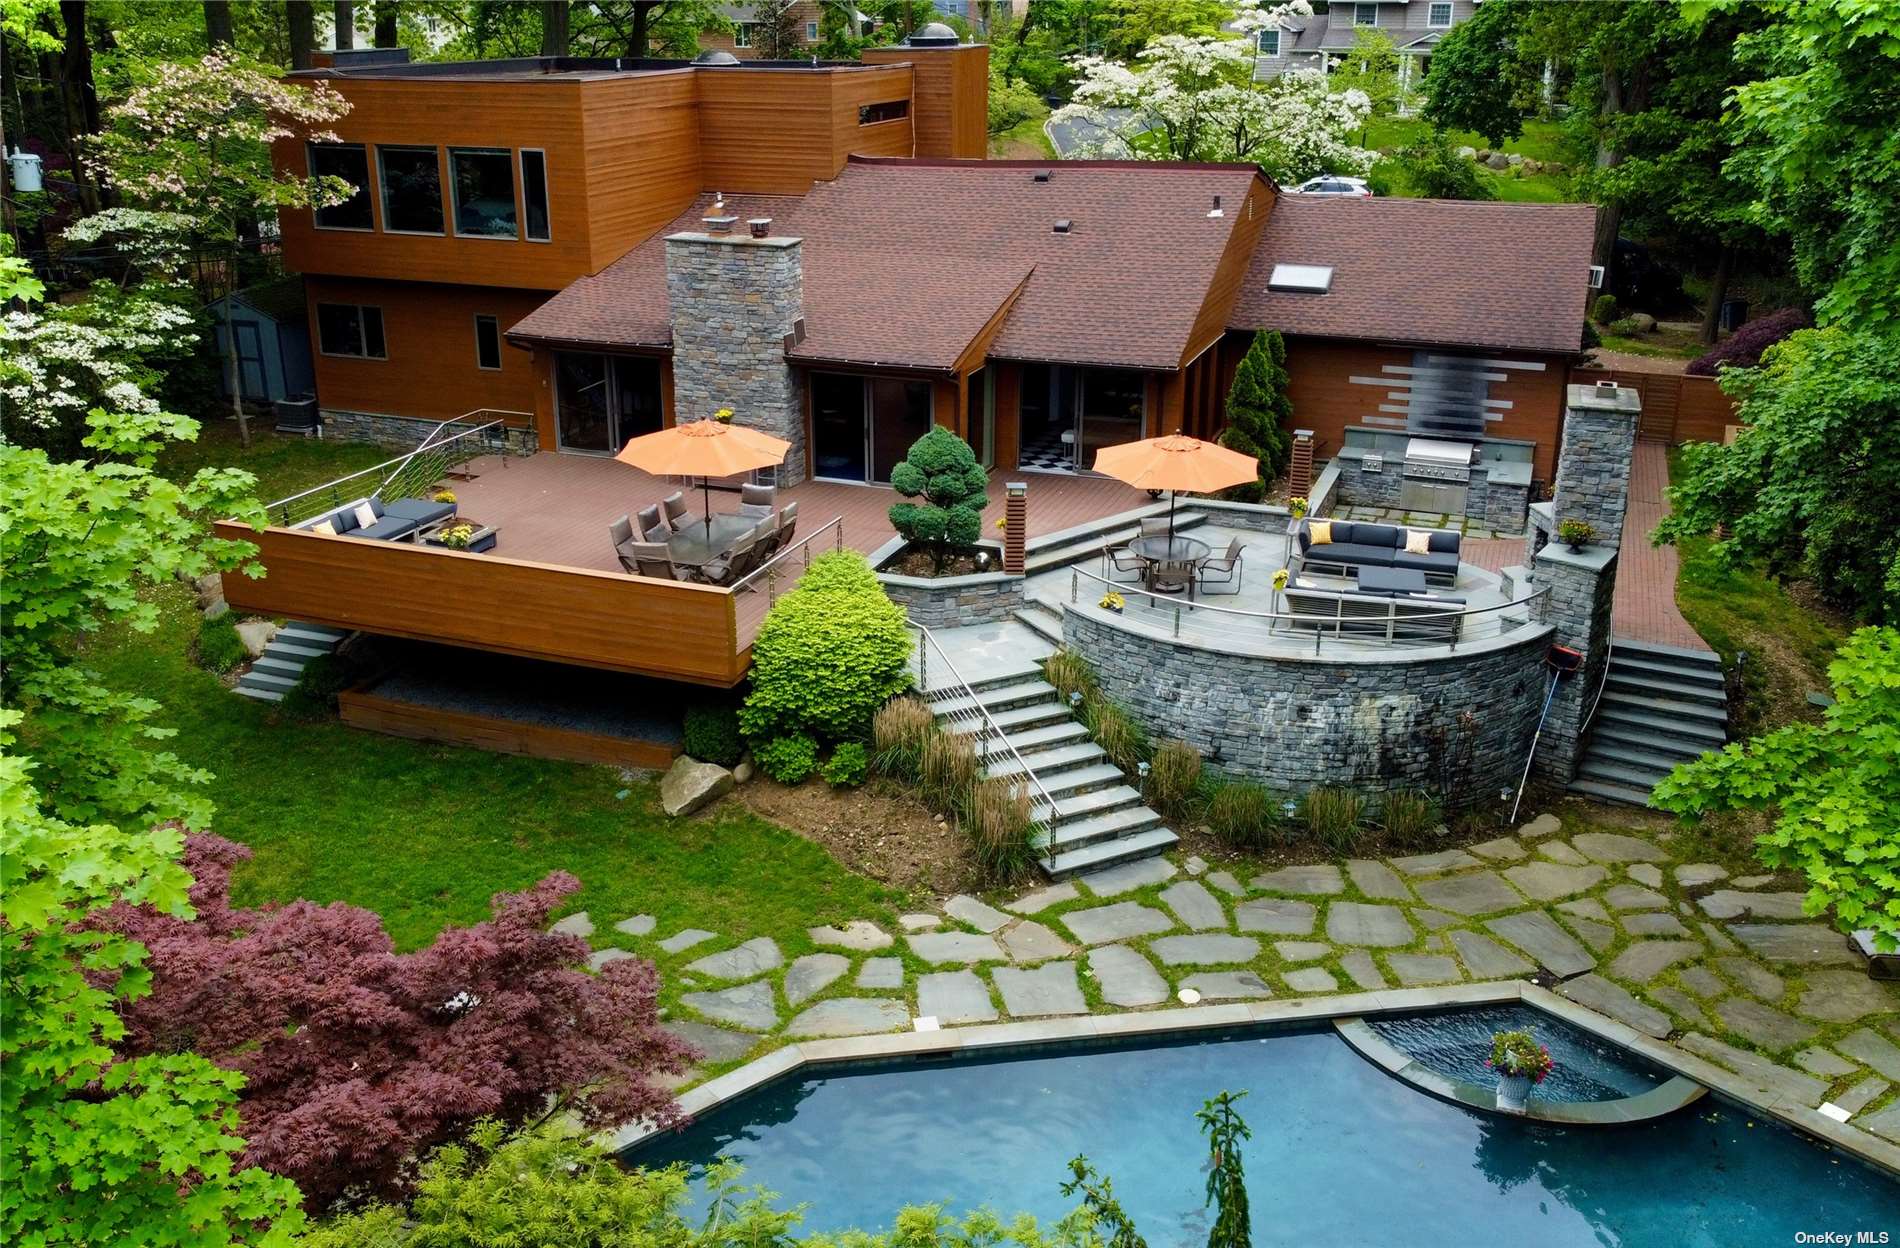 an aerial view of a house with swimming pool garden and outdoor seating